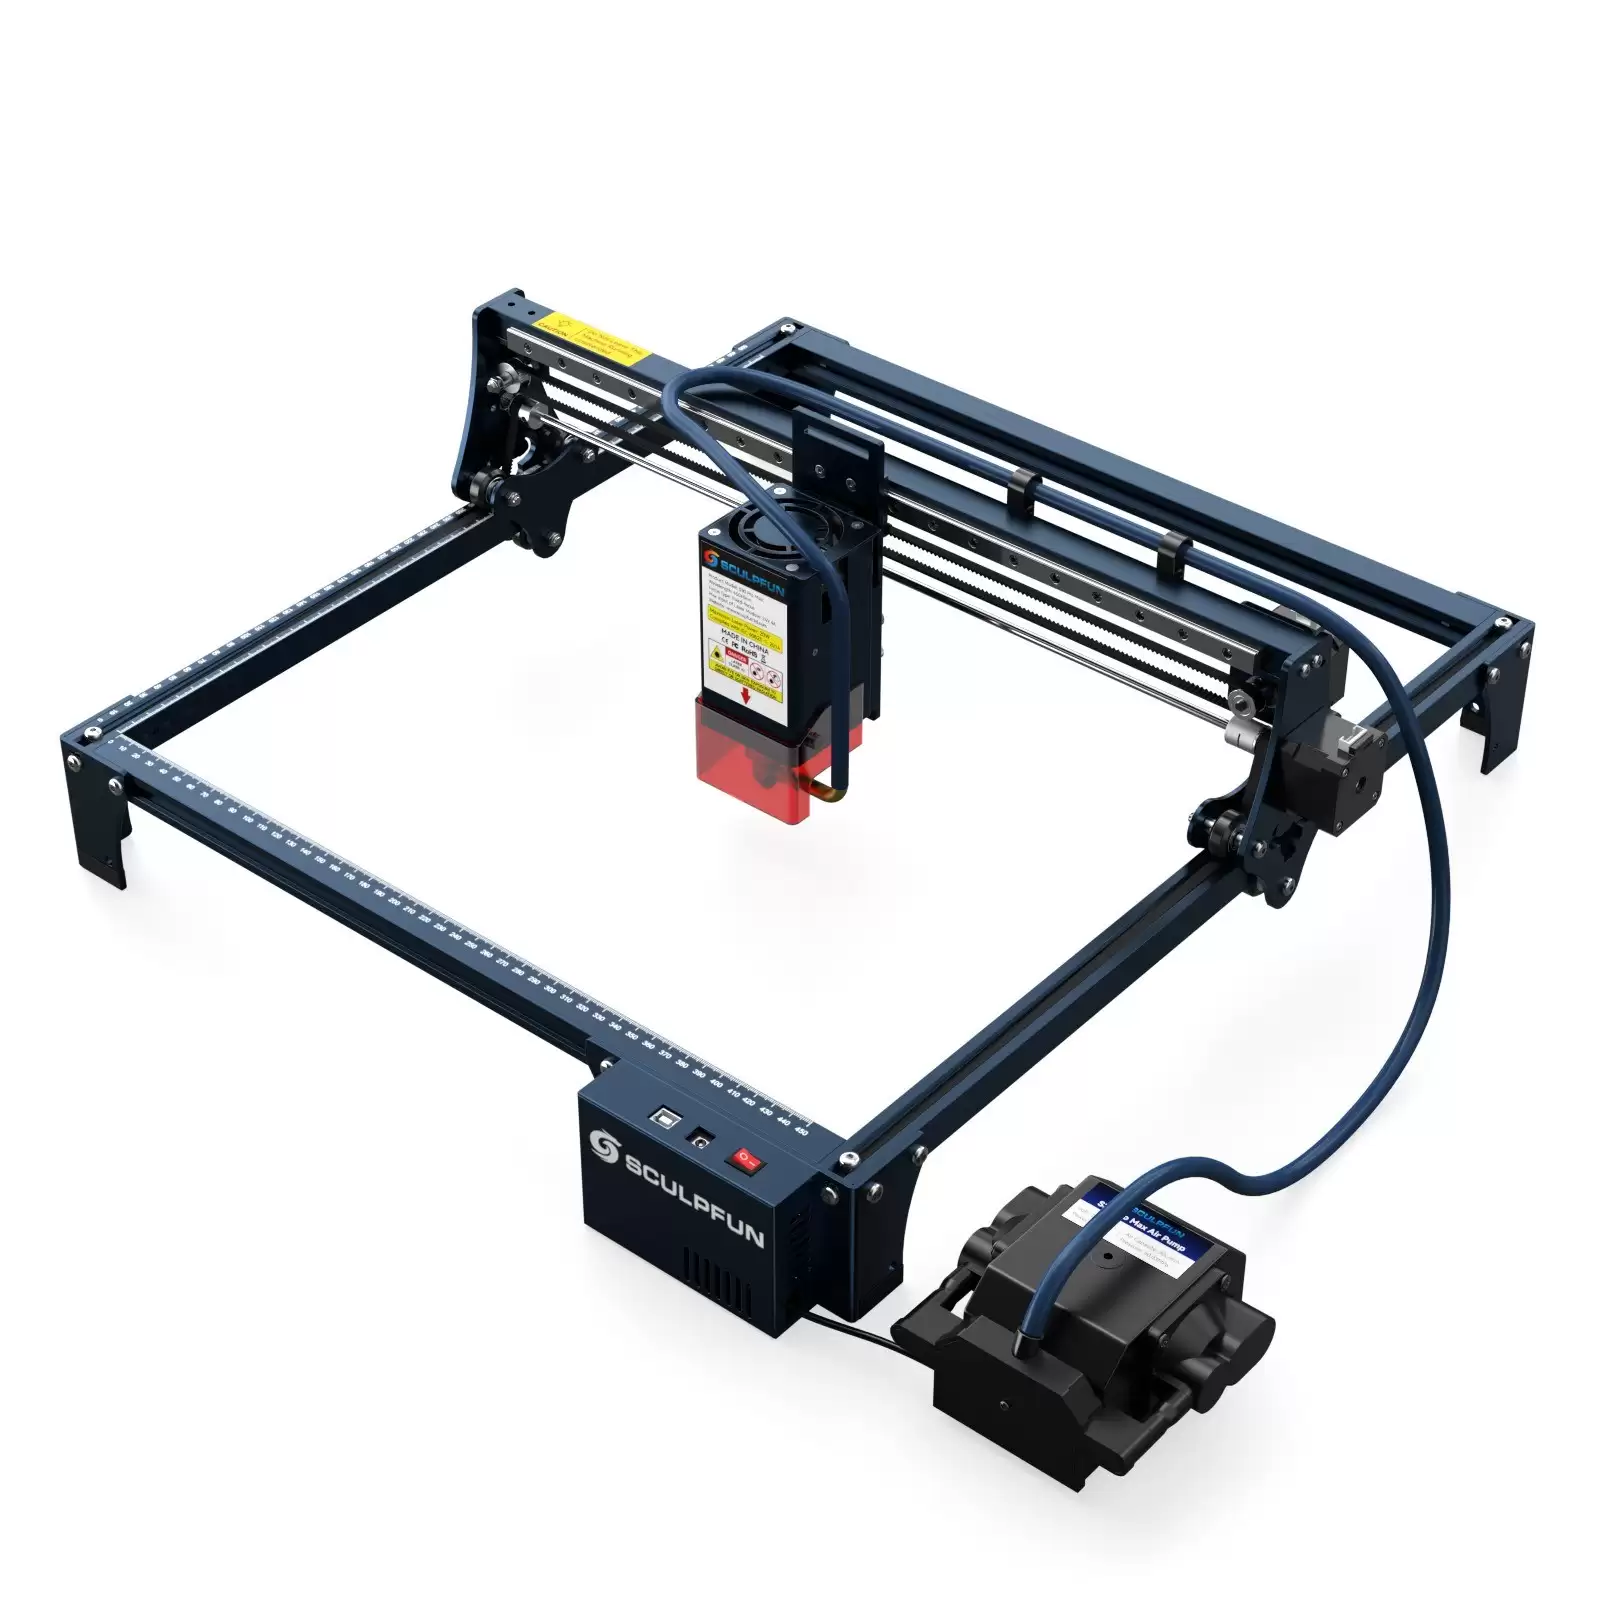 Order In Just $509 Sculpfun S$30 Pro Max 20w Laser Engraver With Automatic Air-assist System With This Discount Coupon At Tomtop